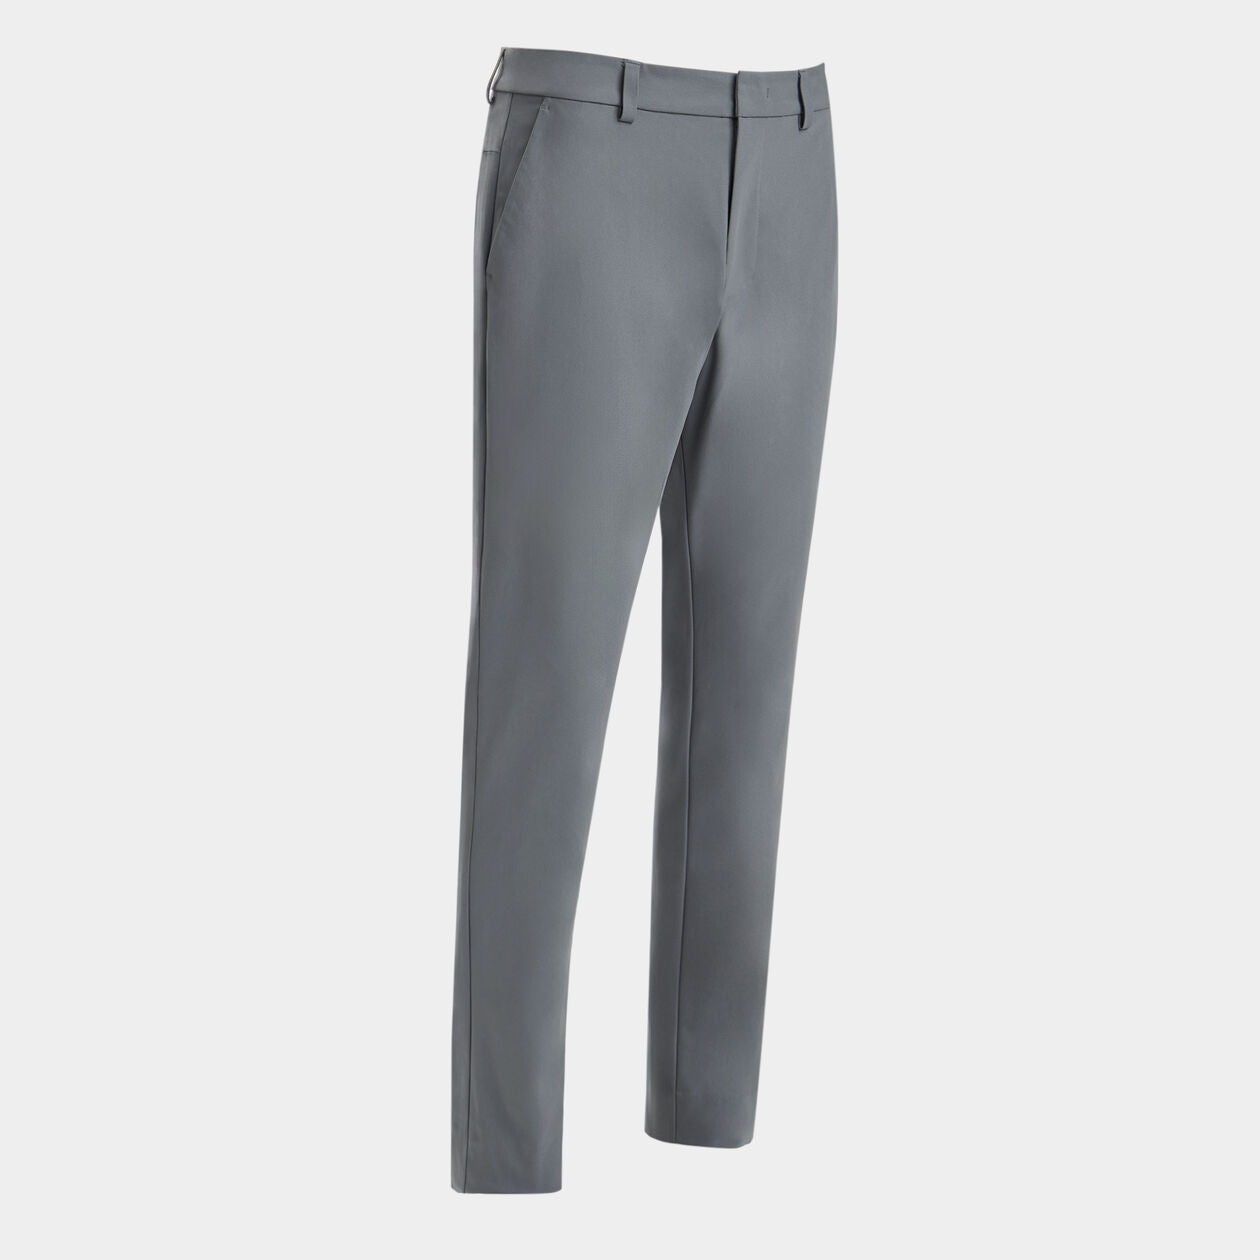 Tech Tour 4-Way Stretch Straight Leg Pant from G/Fore